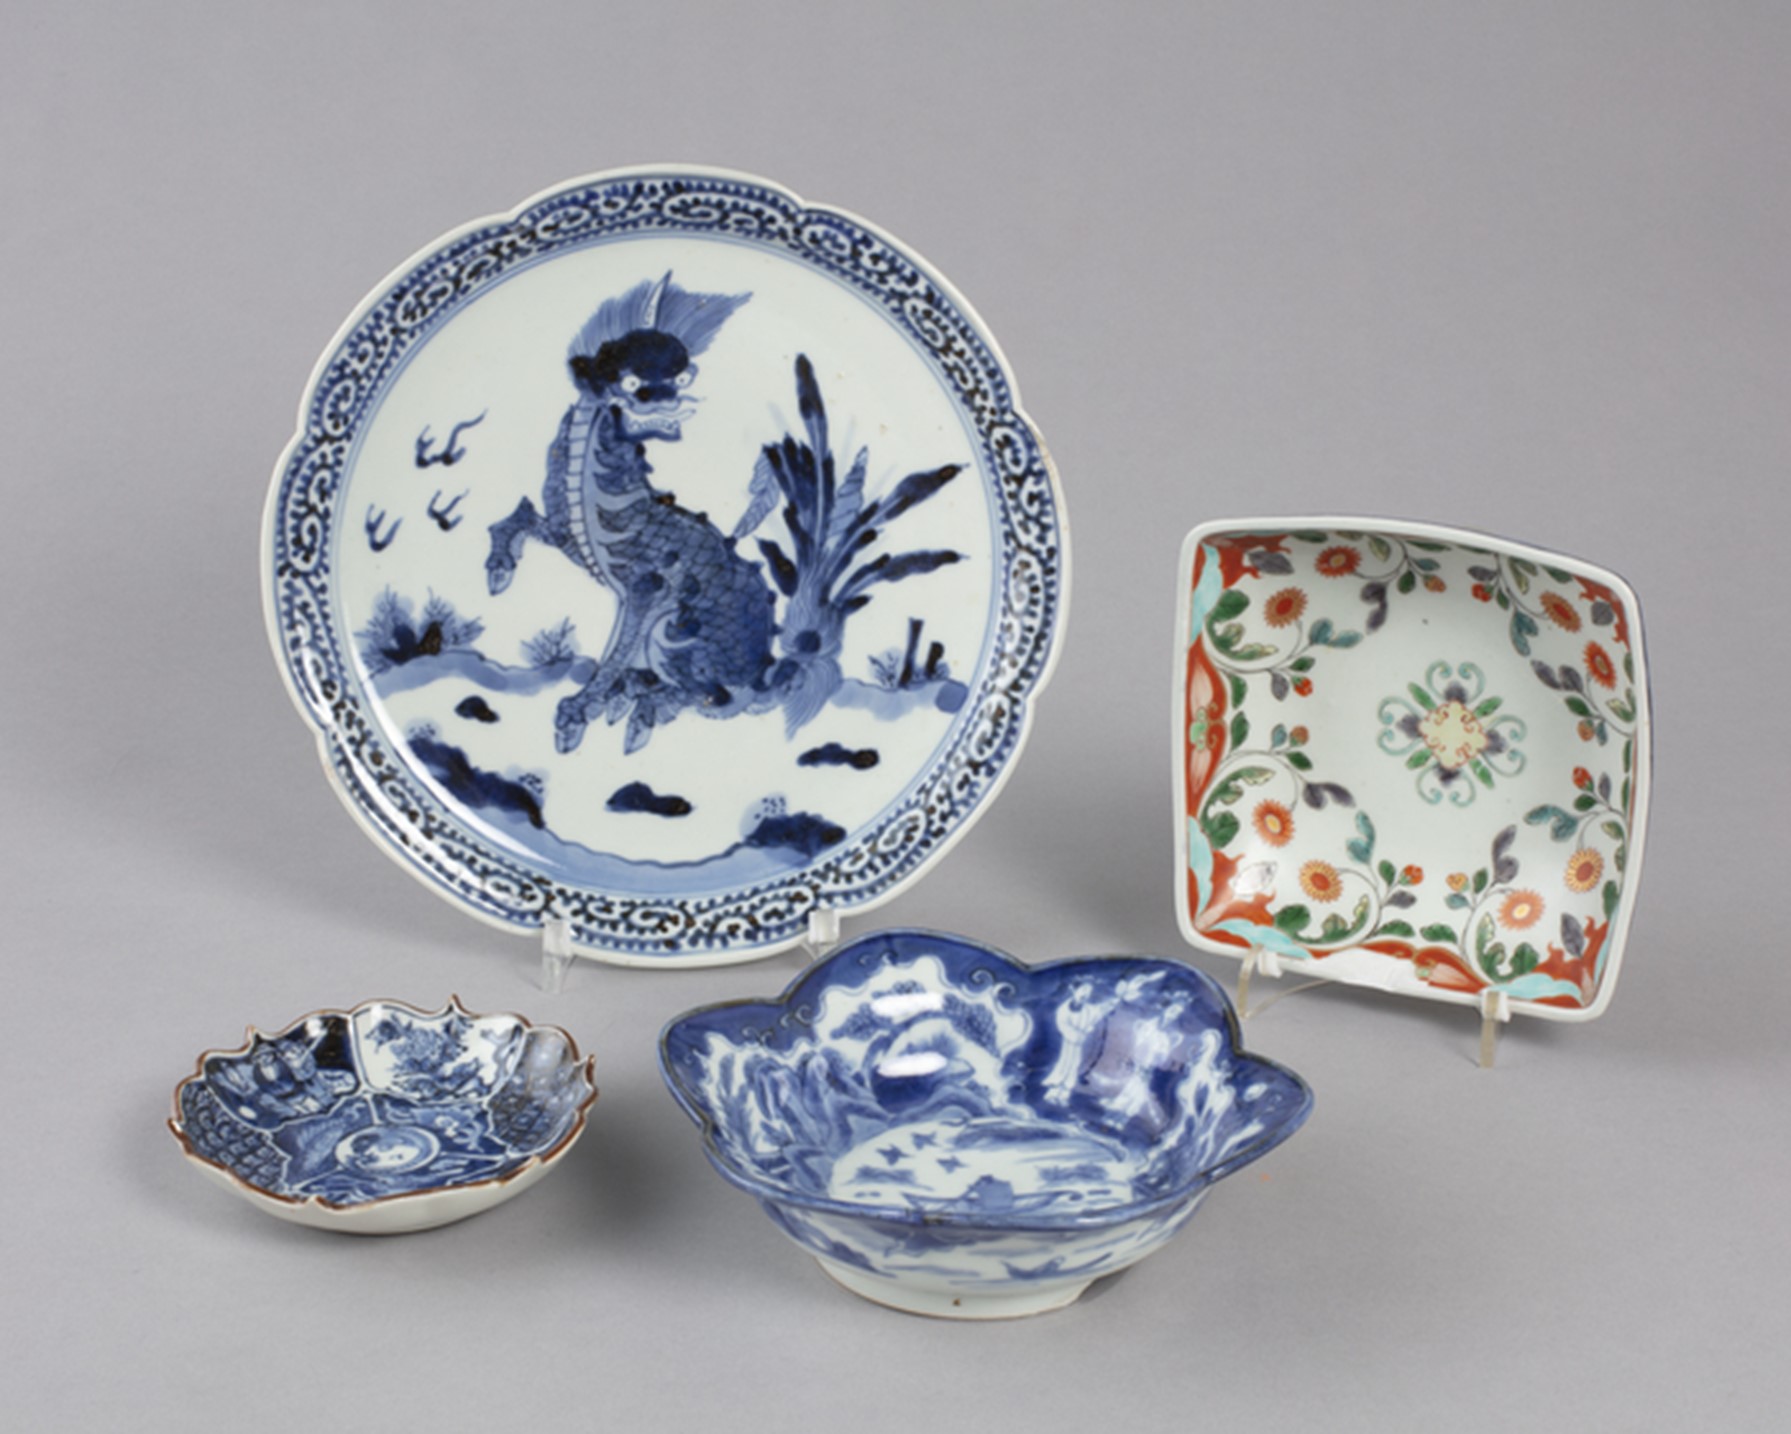 a group of four japanese porcelain plates and bowls, intricately decorated